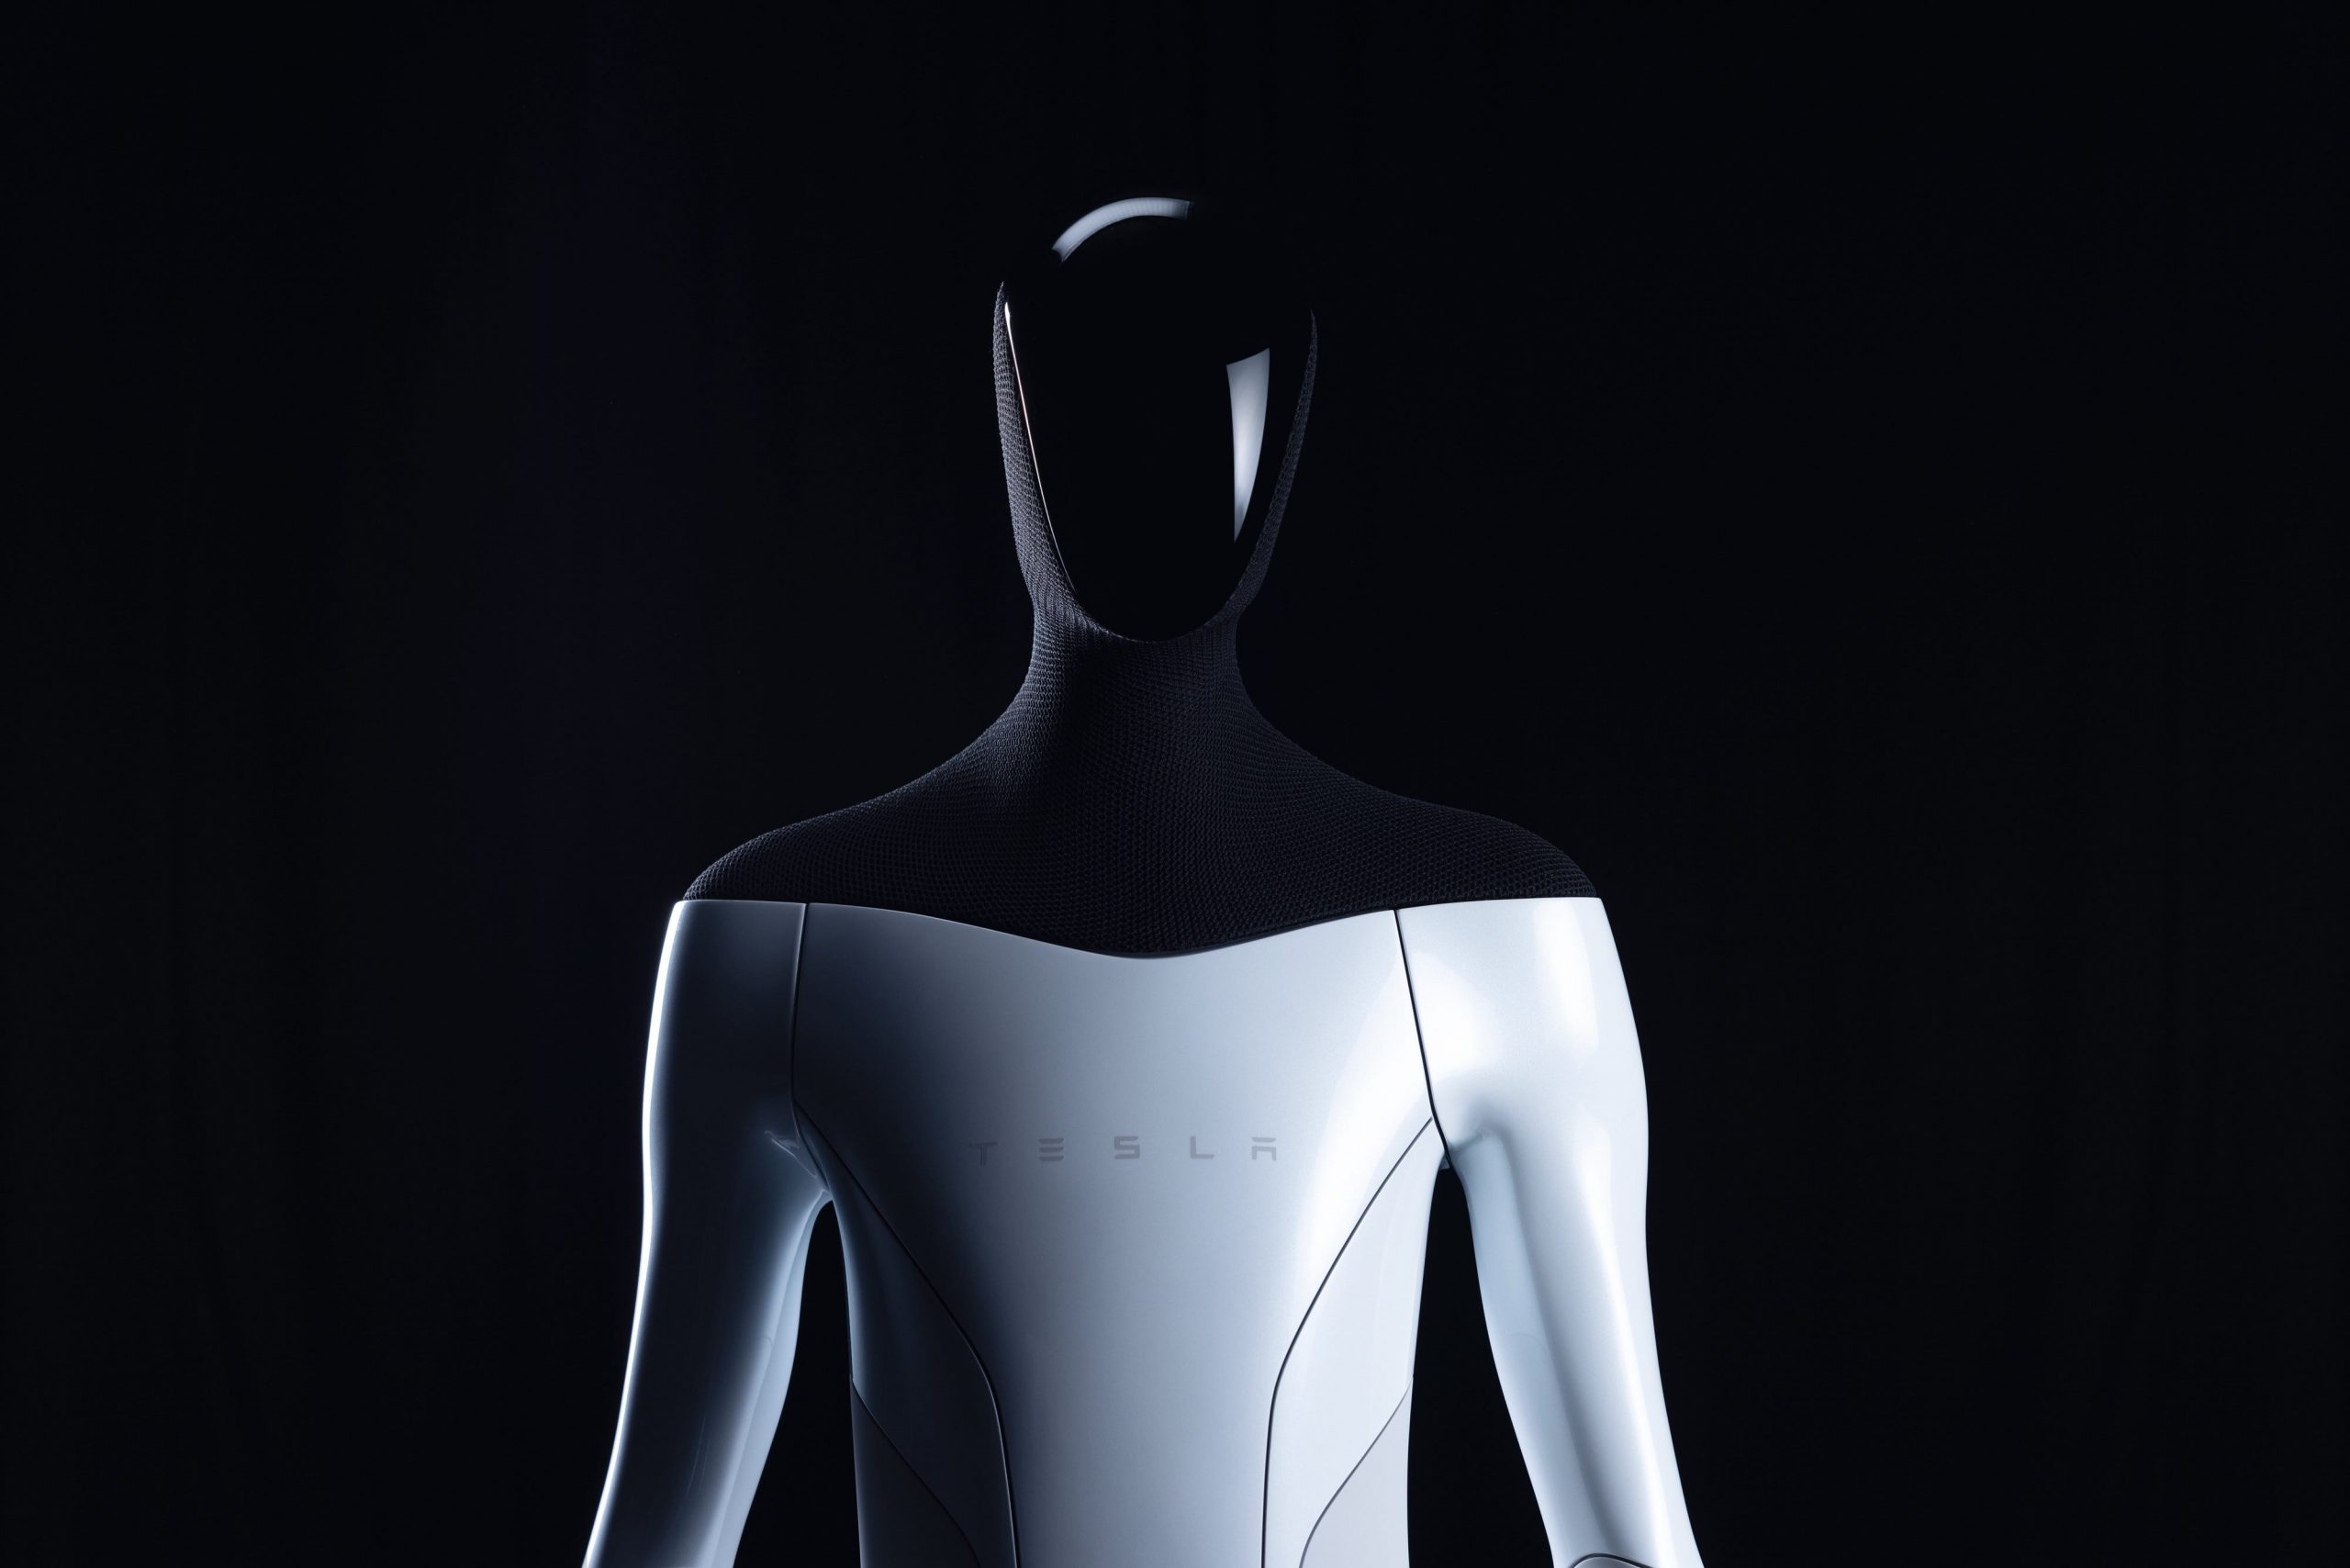 A rendering of the Tesla Bot with a faceless human form and a Tesla logo on its chest